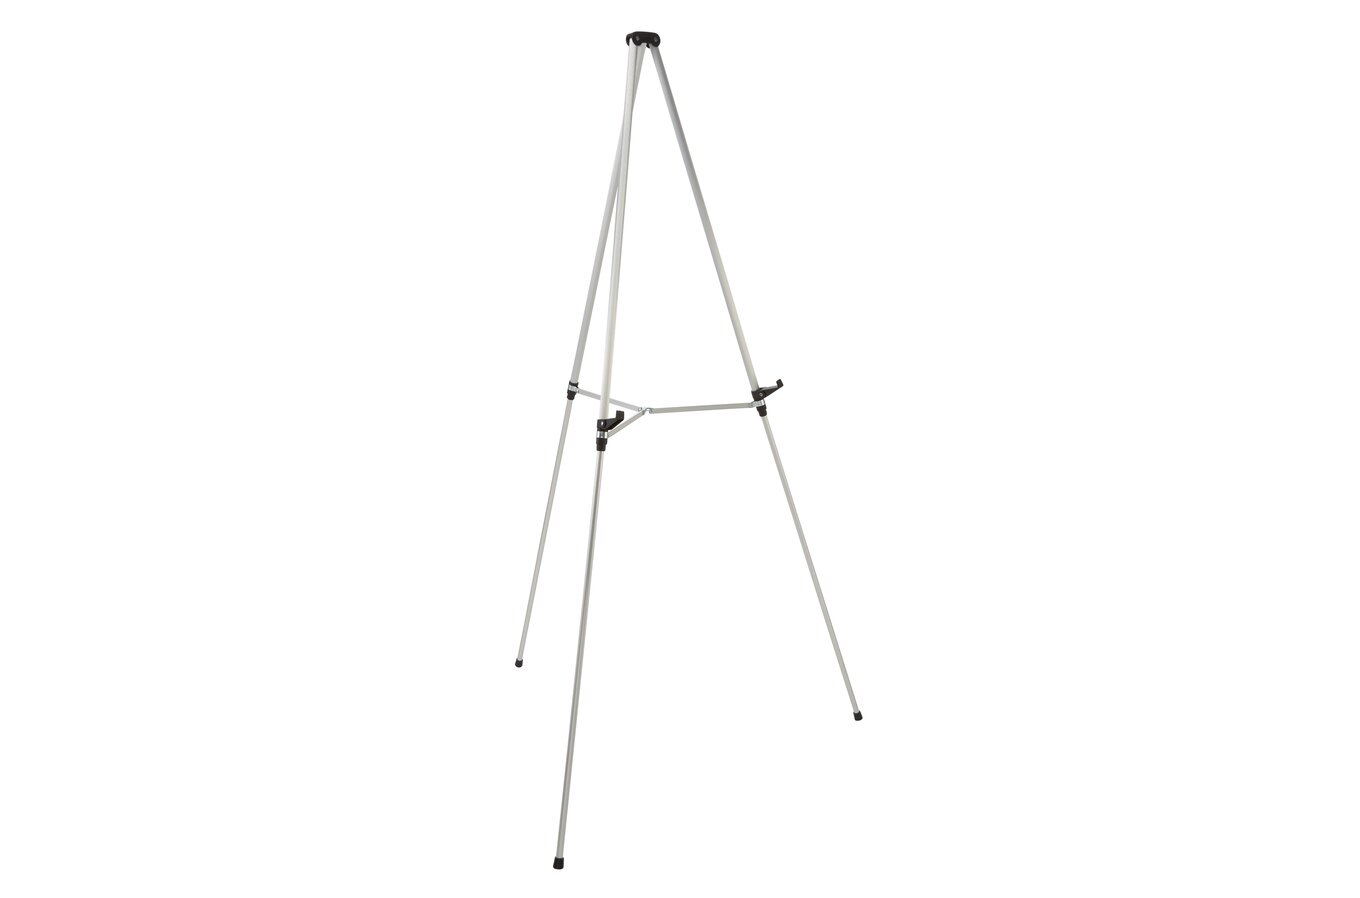 15 Aluminum Tabletop Display Easel, Collapsible Folding Frame